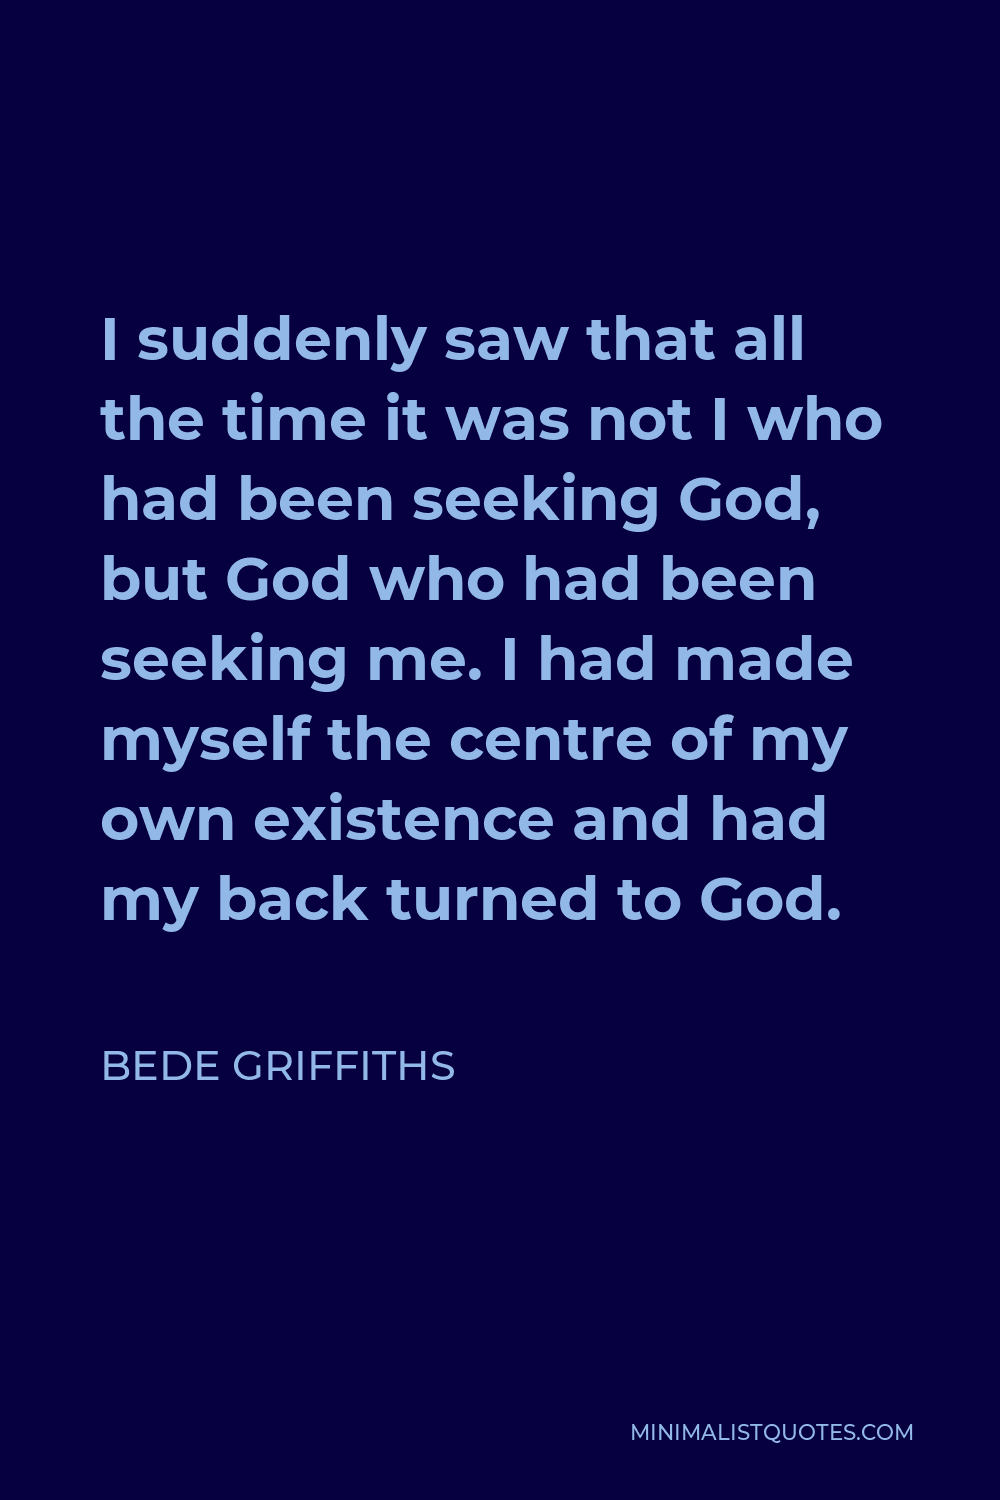 Bede Griffiths Quote - I suddenly saw that all the time it was not I who had been seeking God, but God who had been seeking me. I had made myself the centre of my own existence and had my back turned to God.